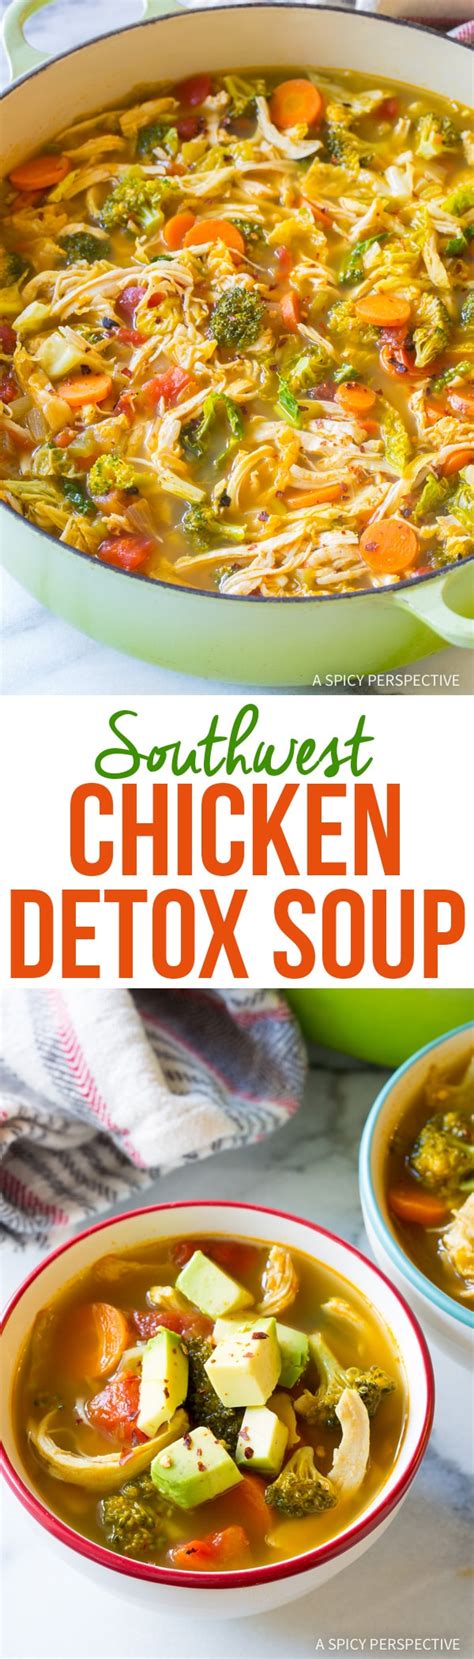 Delicious and easy zesty soup recipe that uses only 6 canned ingredients! Southwest Chicken Detox Soup Recipe - A Spicy Perspective